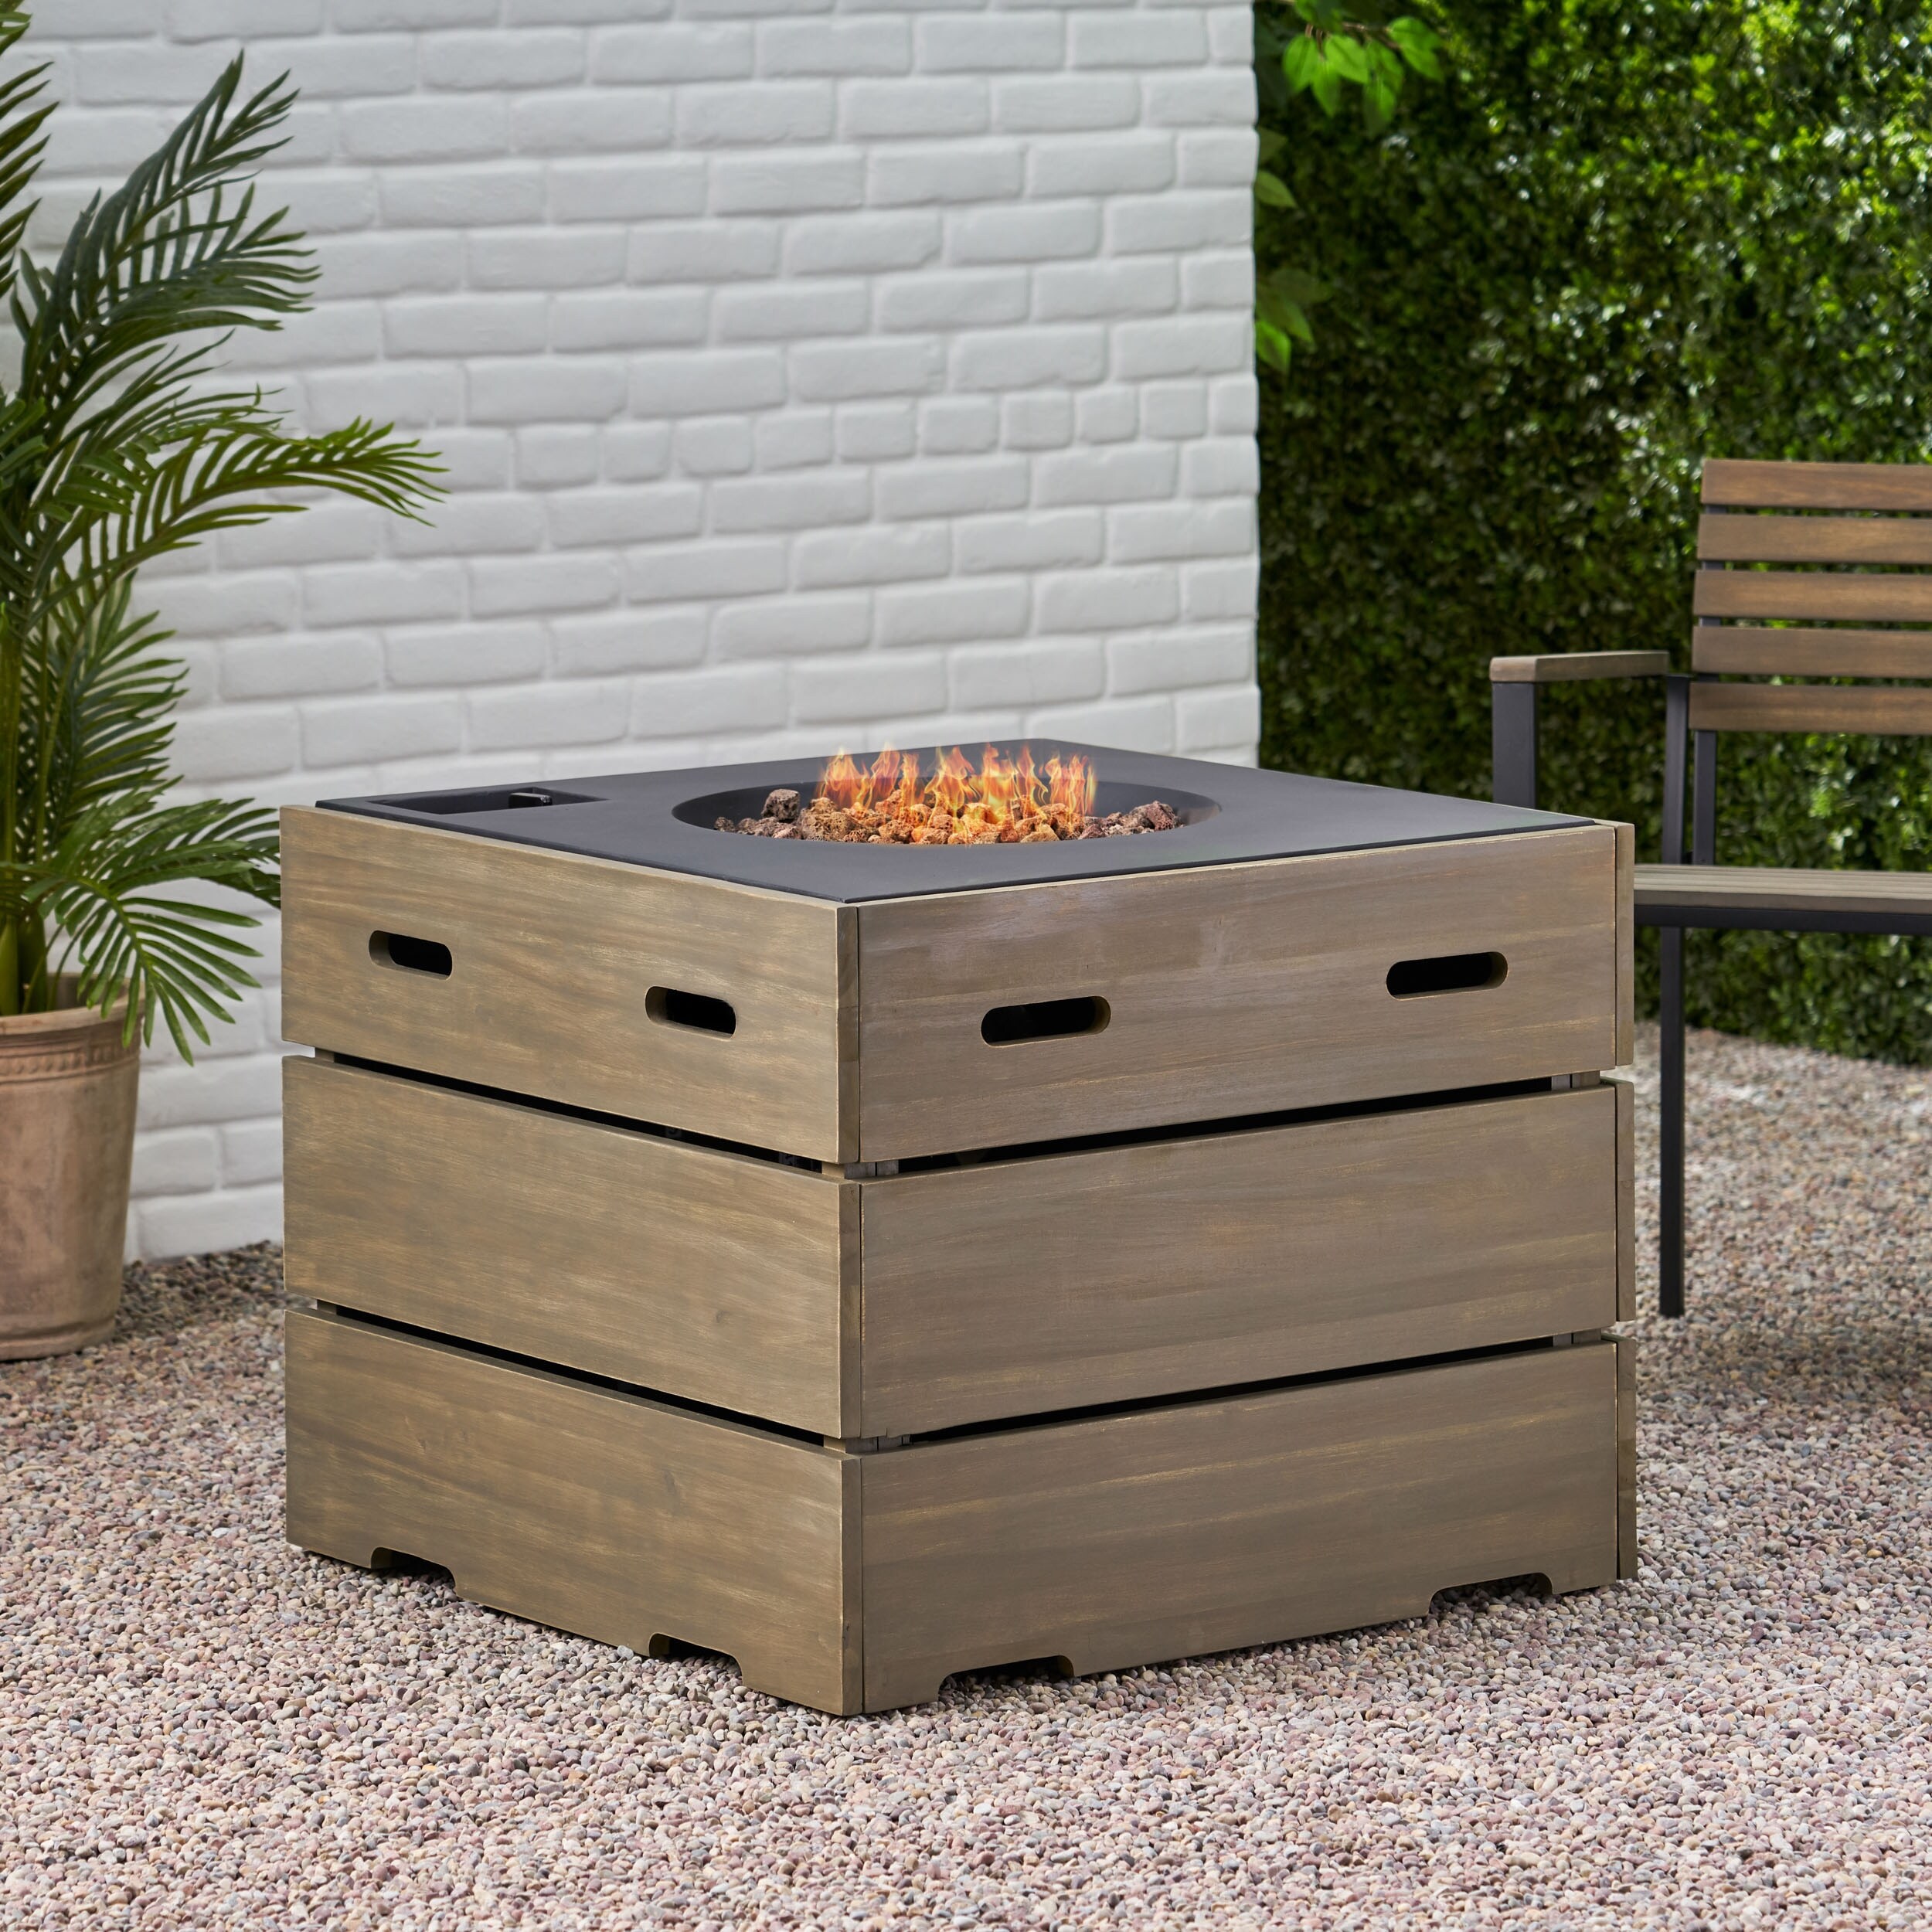 Christopher Knight Home Rodeo Outdoor 40,000 BTU Square Fire Pit - 31.25 inch W x 31.25 inch D x 24.50 inch H